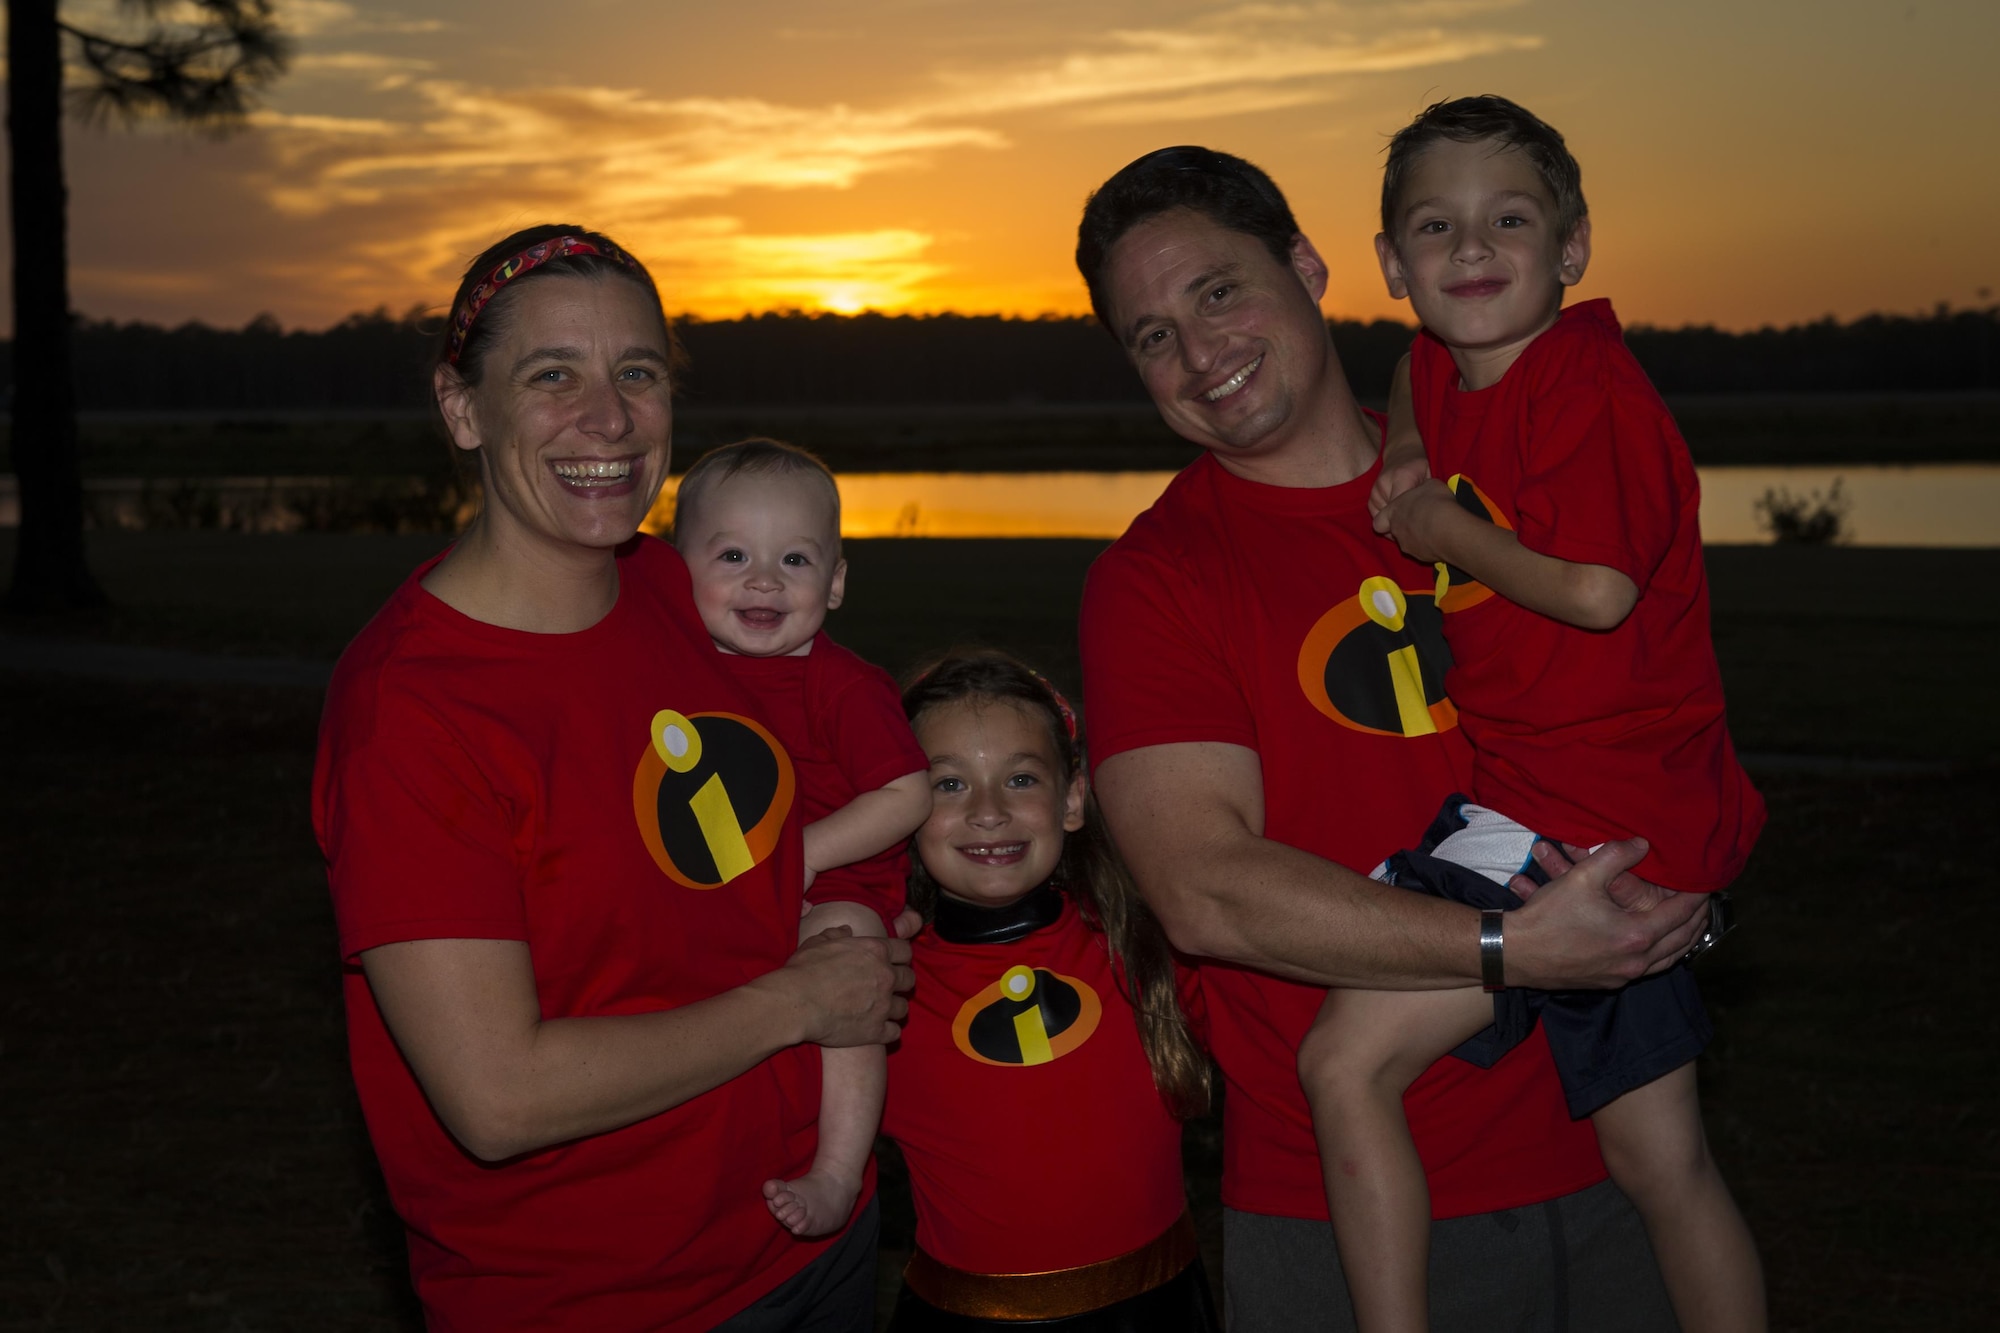 The Savage family poses as “The Incredibles” family during the Haunted Lakes Fall Festival at Gator Lakes Golf Course on Hurlburt Field, Fla., Oct. 28, 2016. The Haunted Lakes Fall Festival was a free event hosted by the 1st Special Operations Force Support Squadron with complimentary food and fun for kids of all ages that included haunted hay rides, costume contests, games and a movie. (U.S. Air Force photo by Airman 1st Class Joseph Pick)